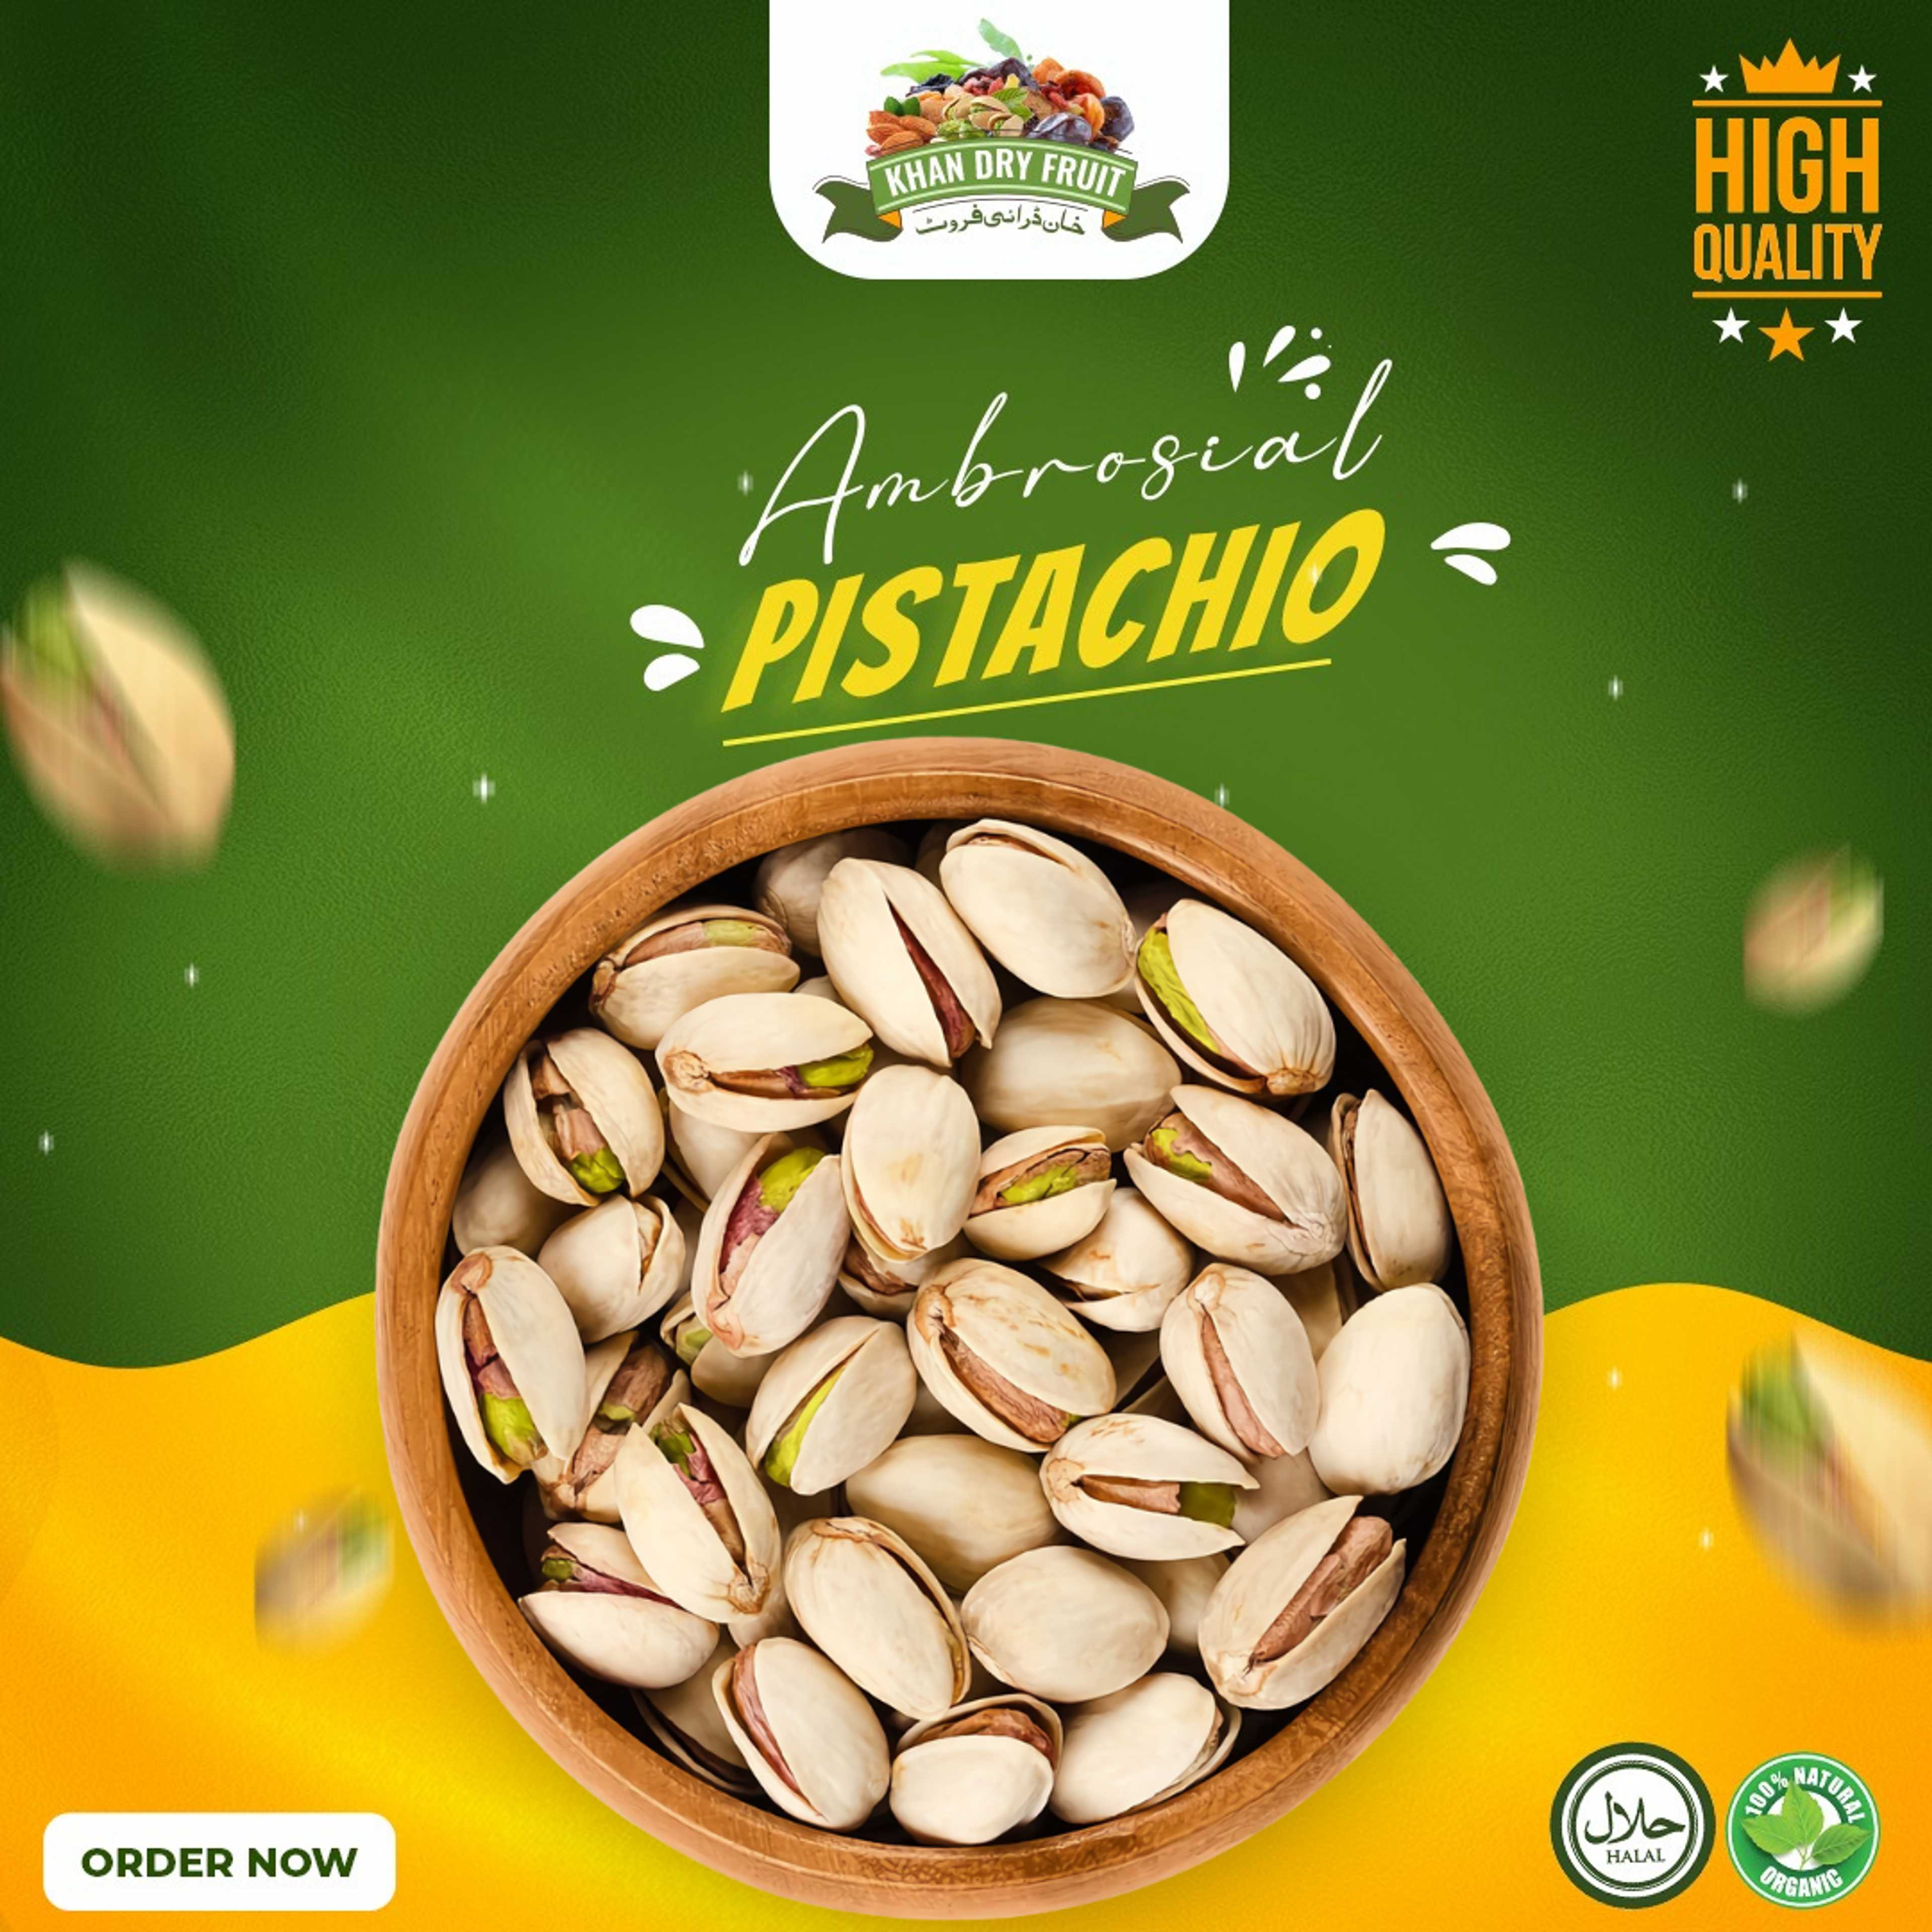 Pistachio Salted - High Quality - Fresh Stock - 250grams Pack - #DryFruit #Freshstock #highquality #bestofferedprice #pistasalted #pistawithshells #pistachiosalted